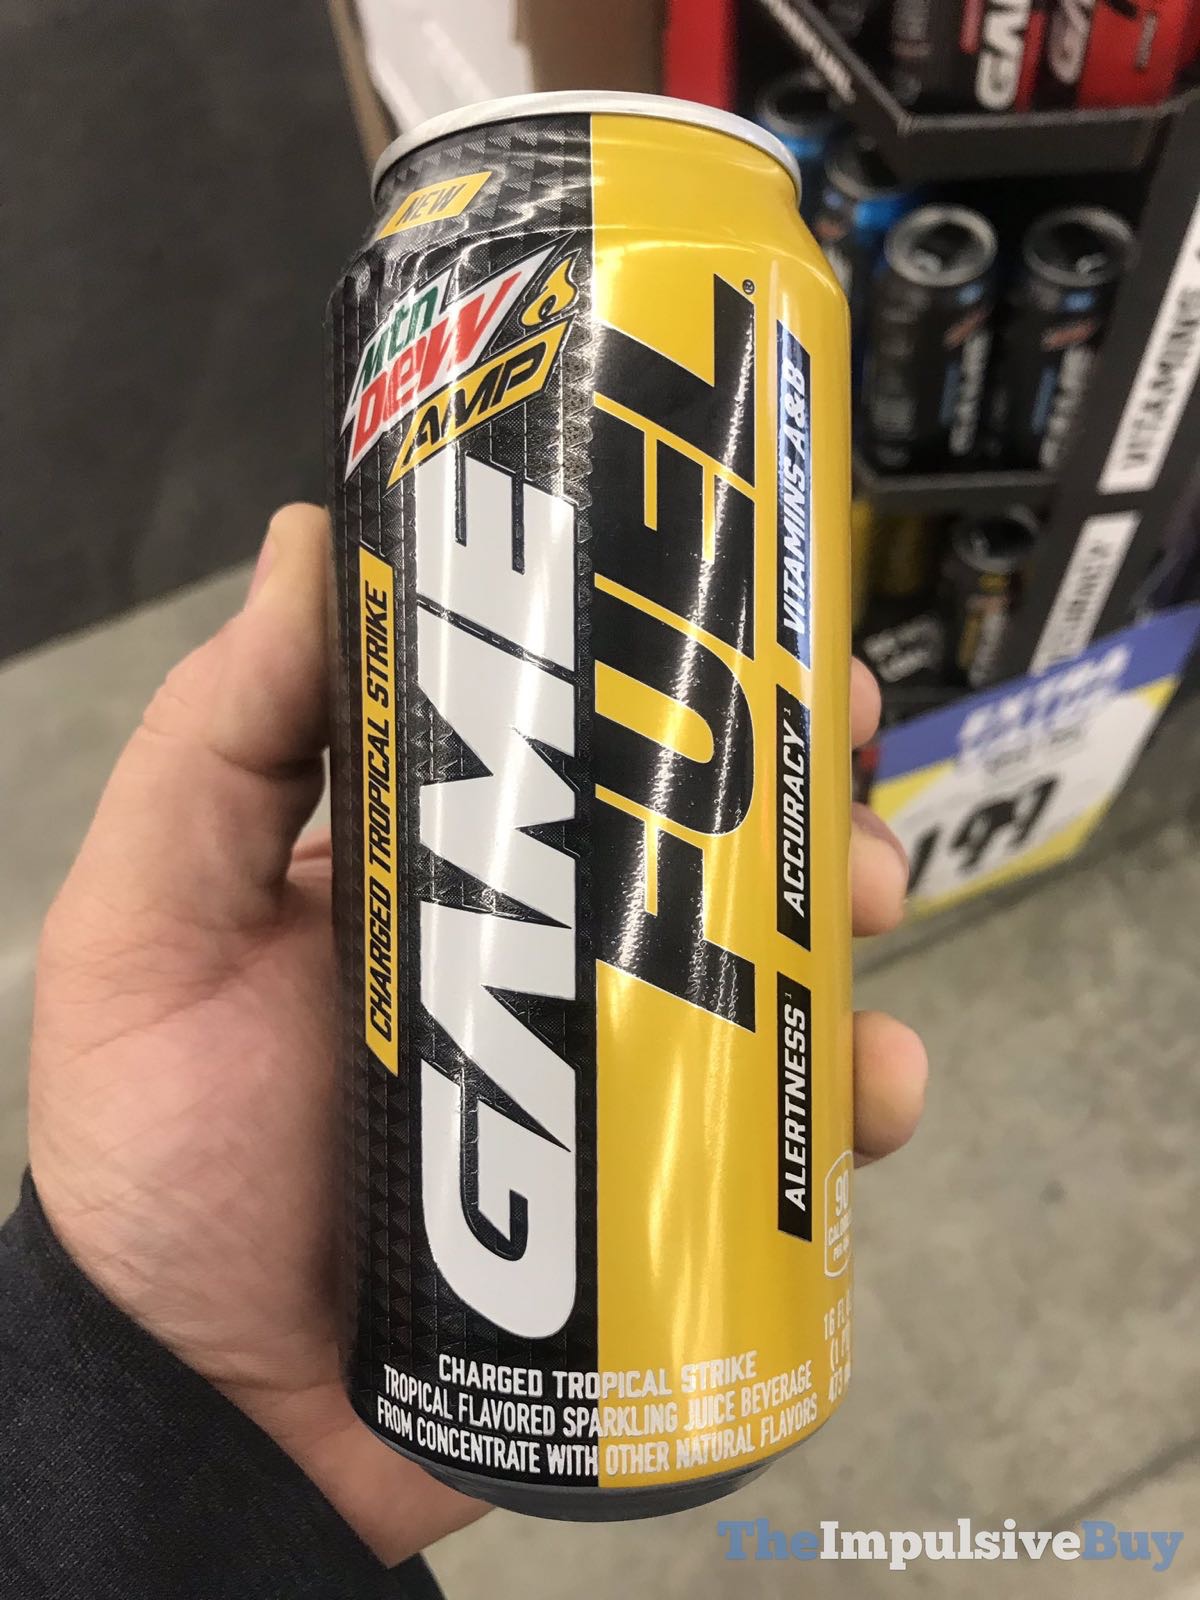 SPOTTED Mtn Dew Amp Game Fuel The Impulsive Buy